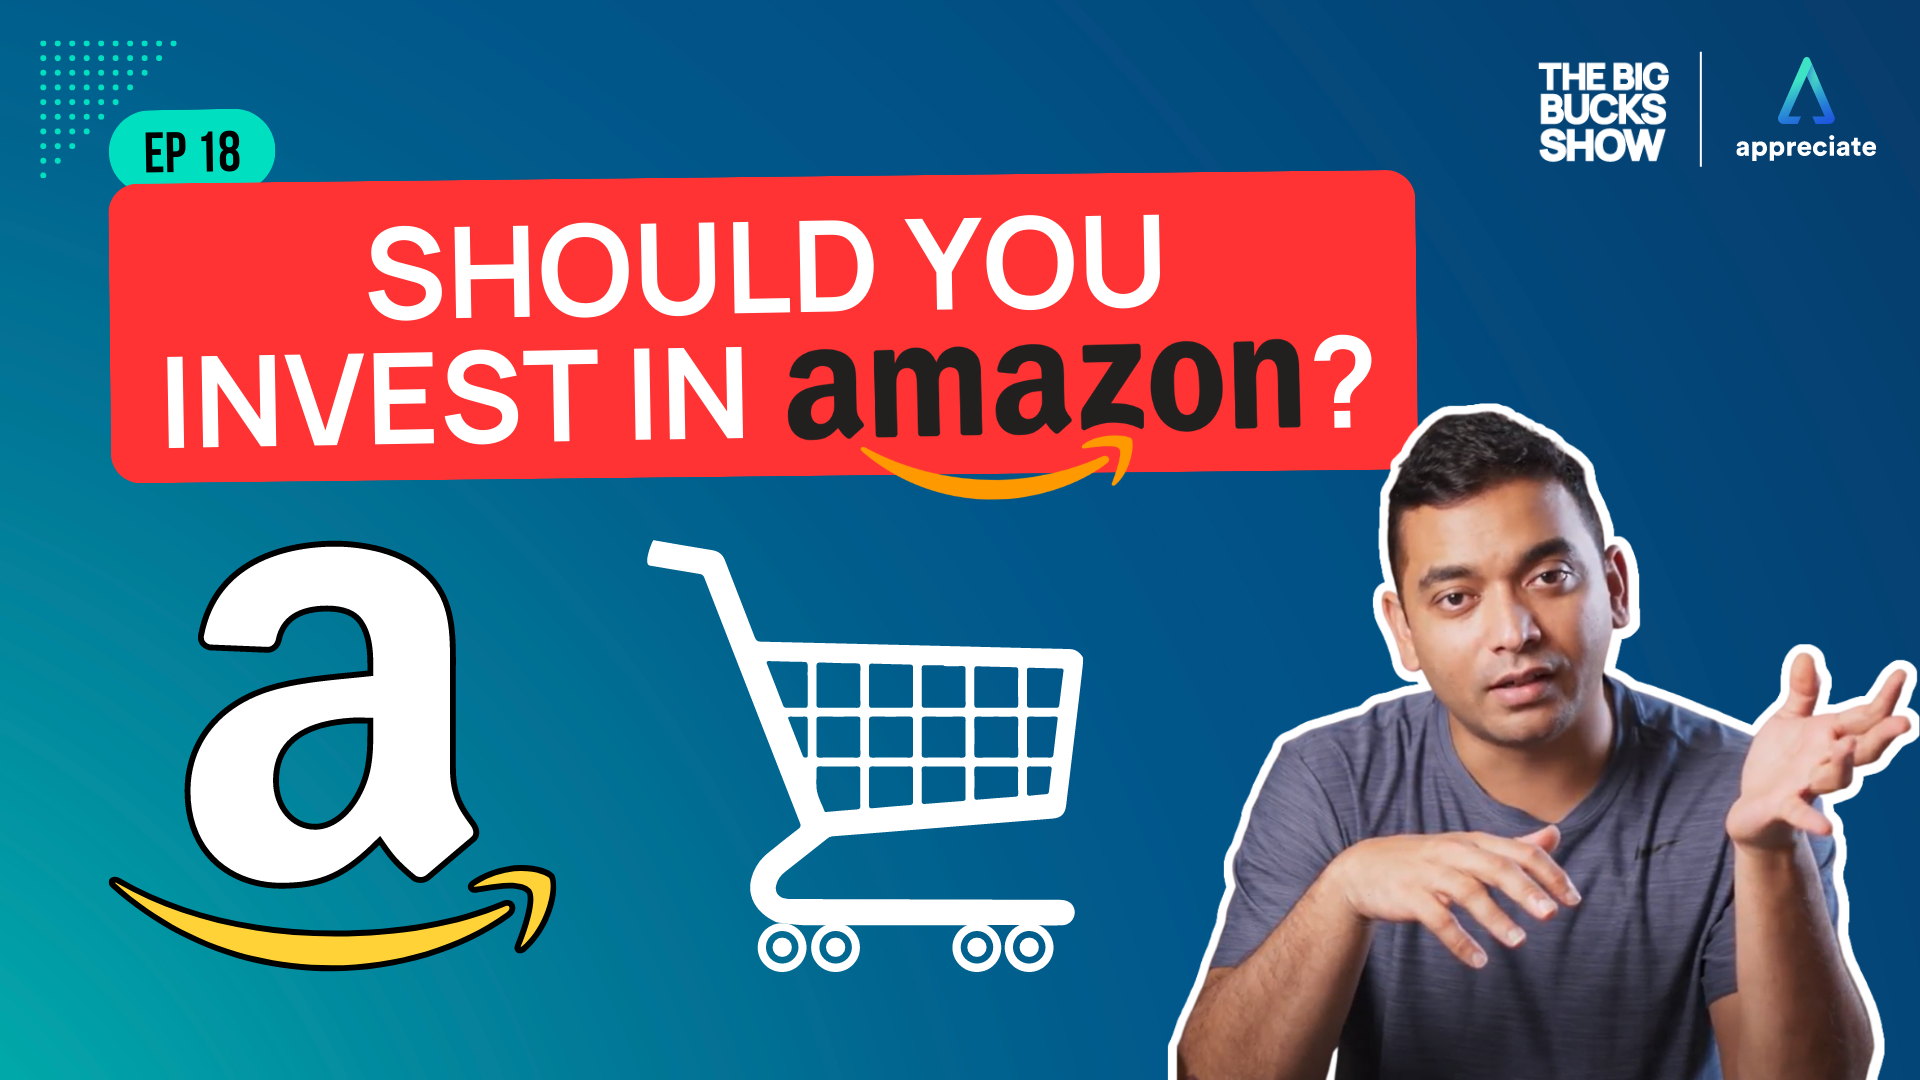 Episode 18 - Should you invest in Amazon? Thumbnail.